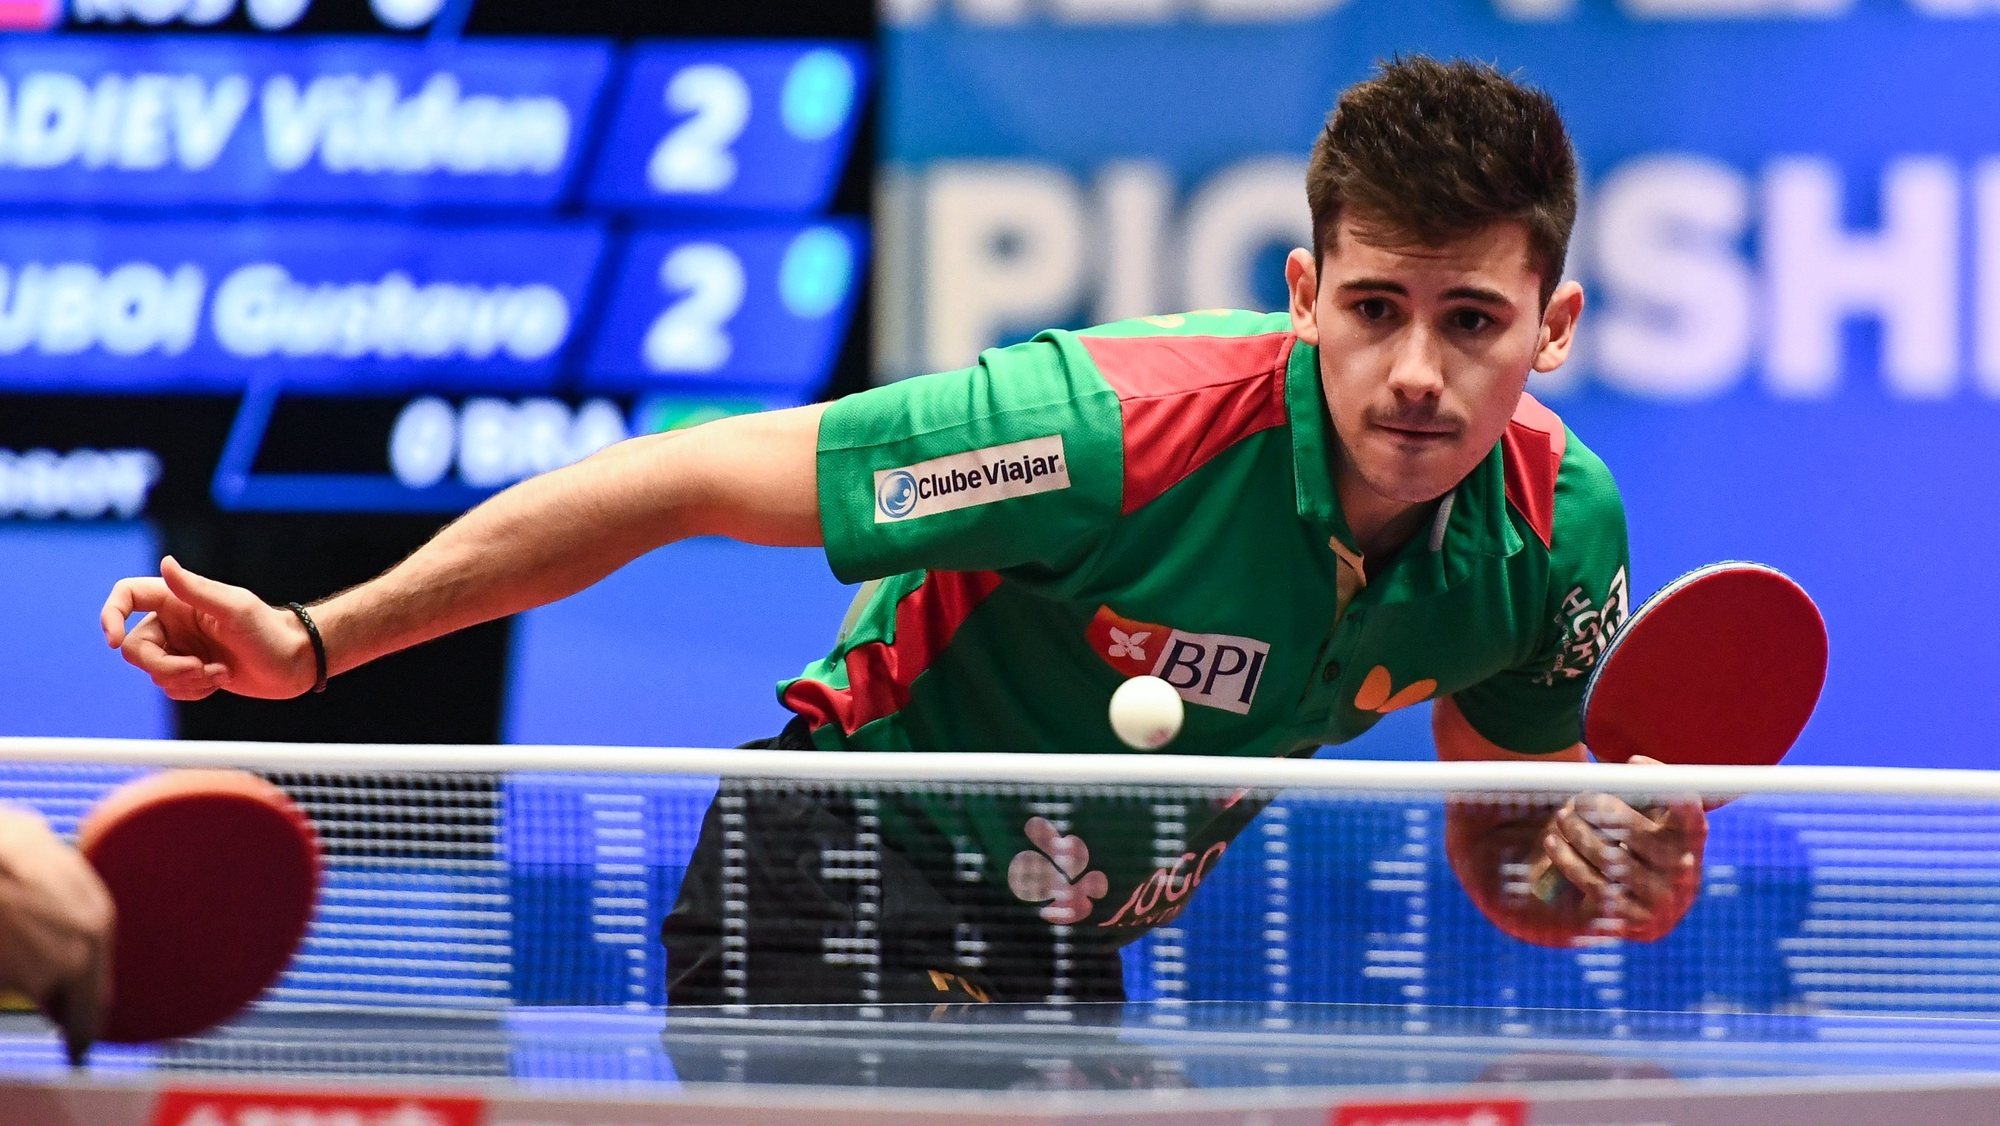 epa06706163 Joao Geraldo of Portugal in action against Lubomir Jancarik of Czech Republic during the game between Portugal and the Czech Republic in the group stage of the Table Tennis Team World Championships in Halmstad, Sweden, 02 May 2018.  EPA/CHRISTIAN BRUNA